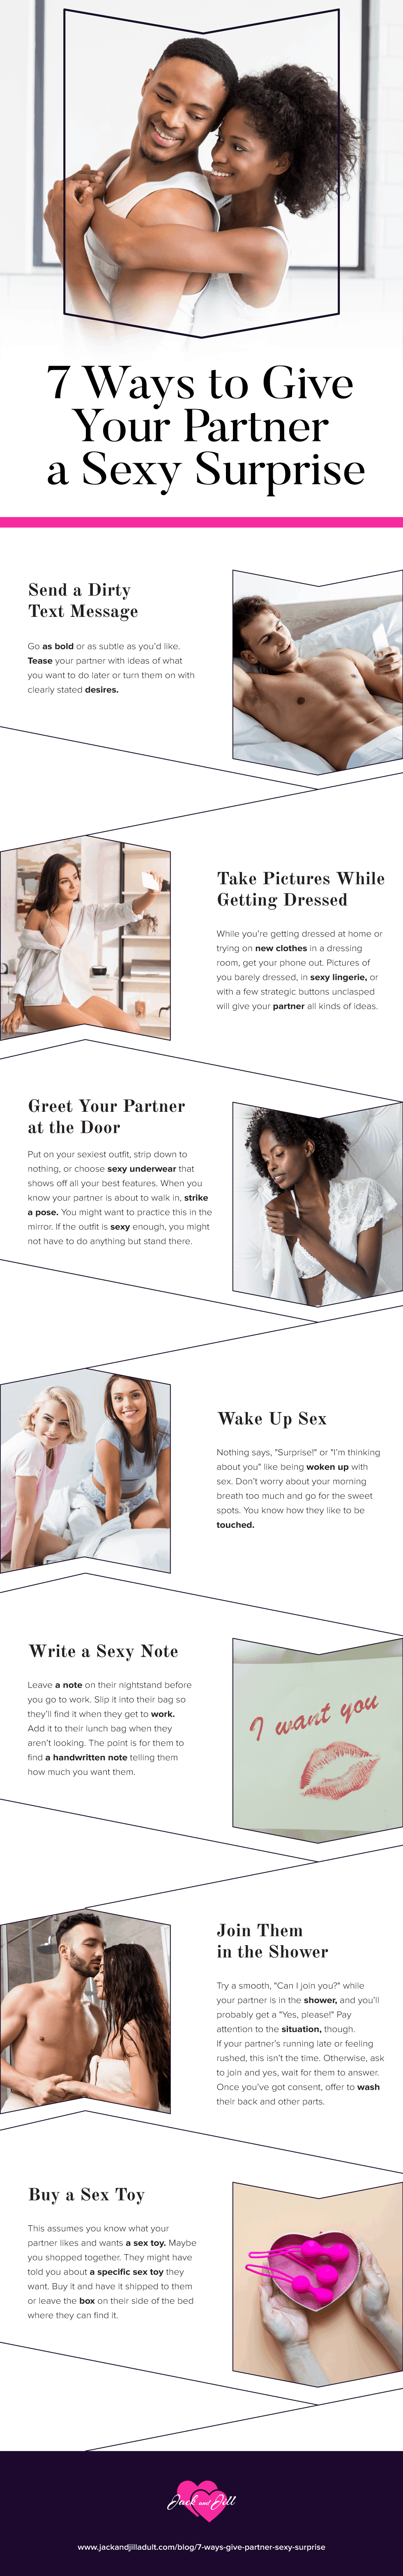 Infographic for 7 Ways to Give Your Partner a Sexy Surprise